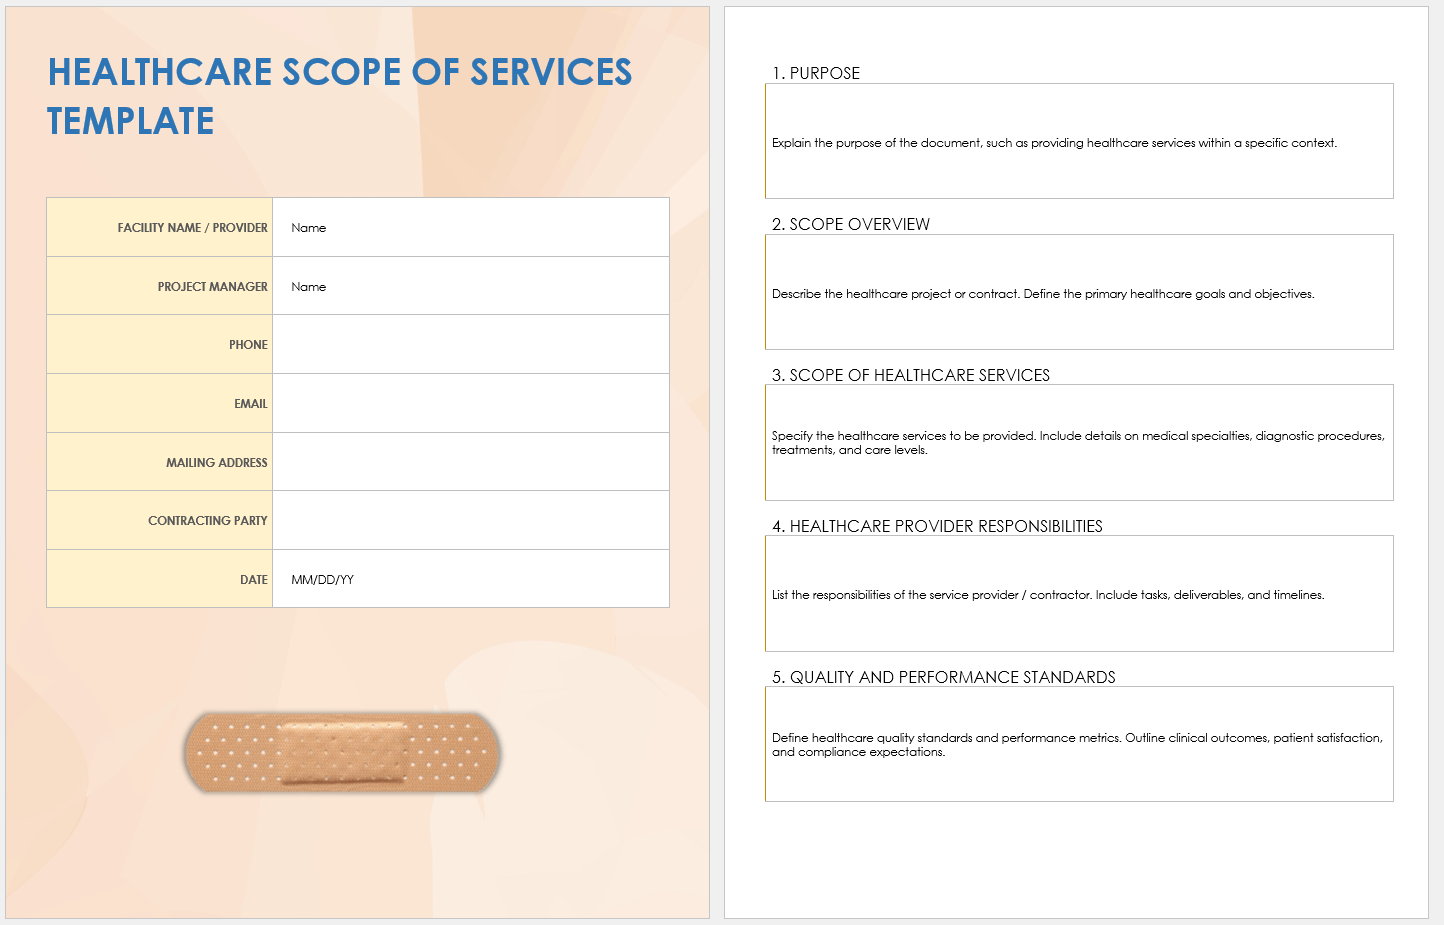 Healthcare Scope of Services Template